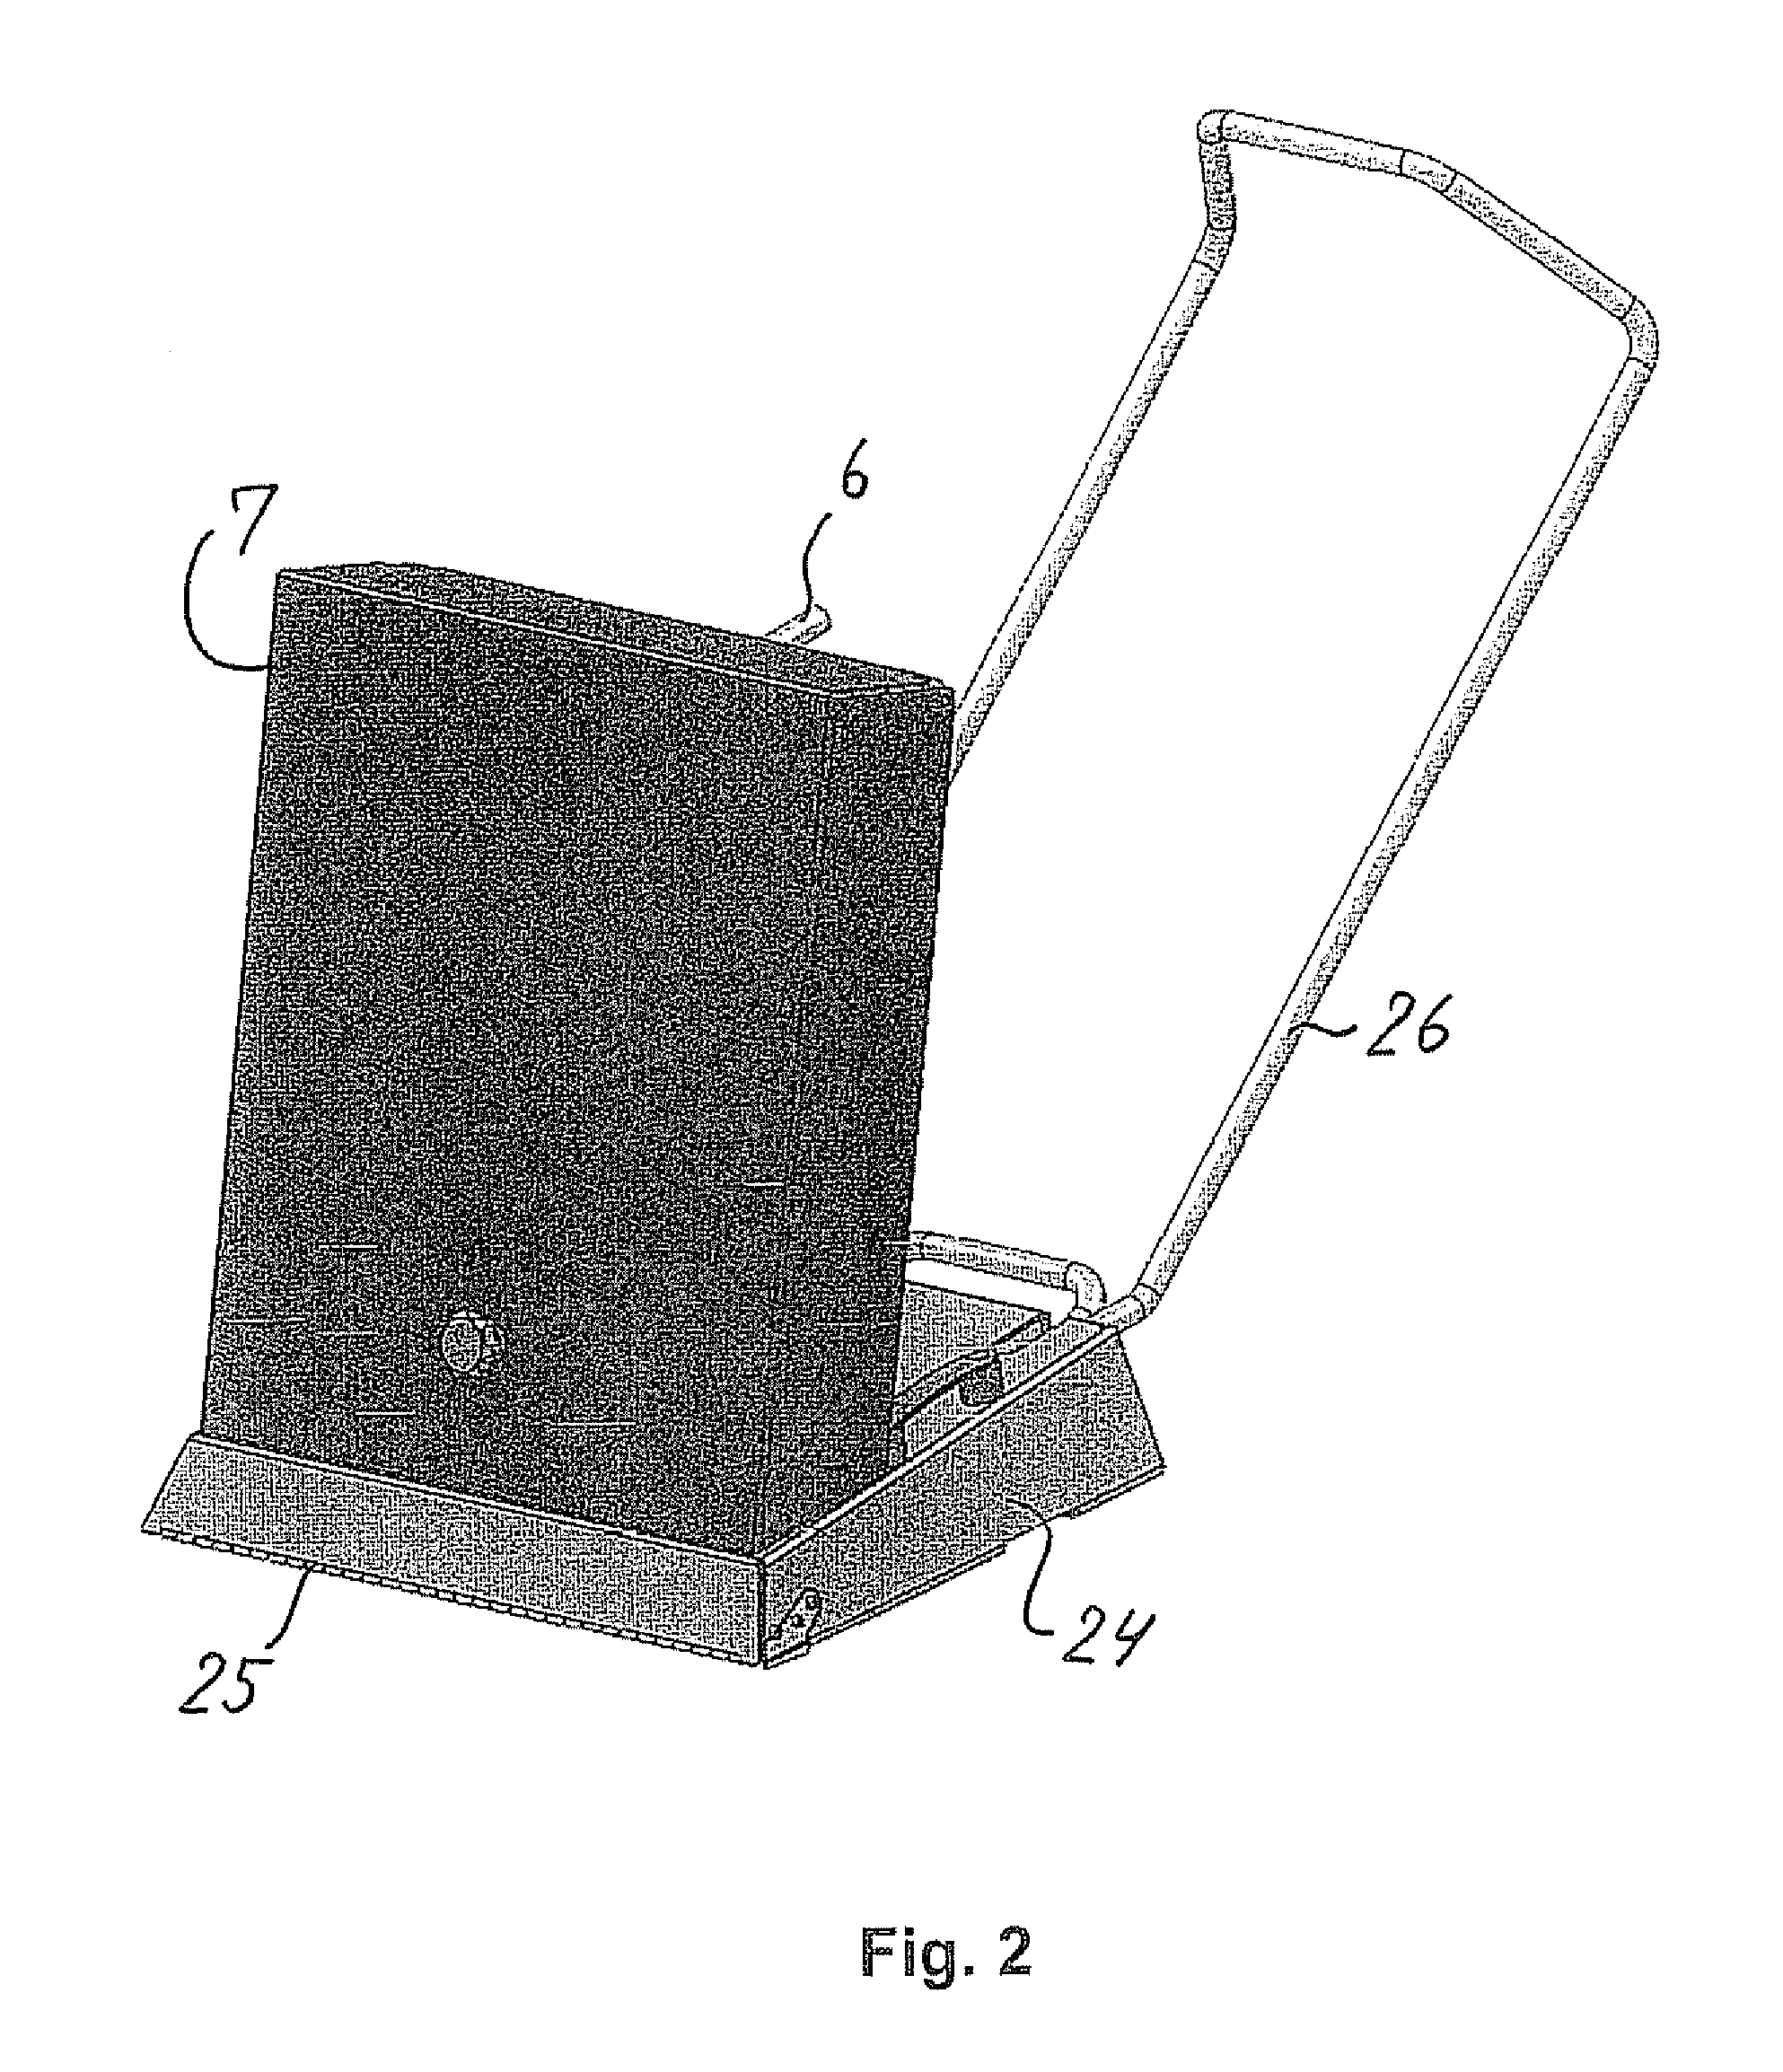 Apparatus for the spreading of adhesive material